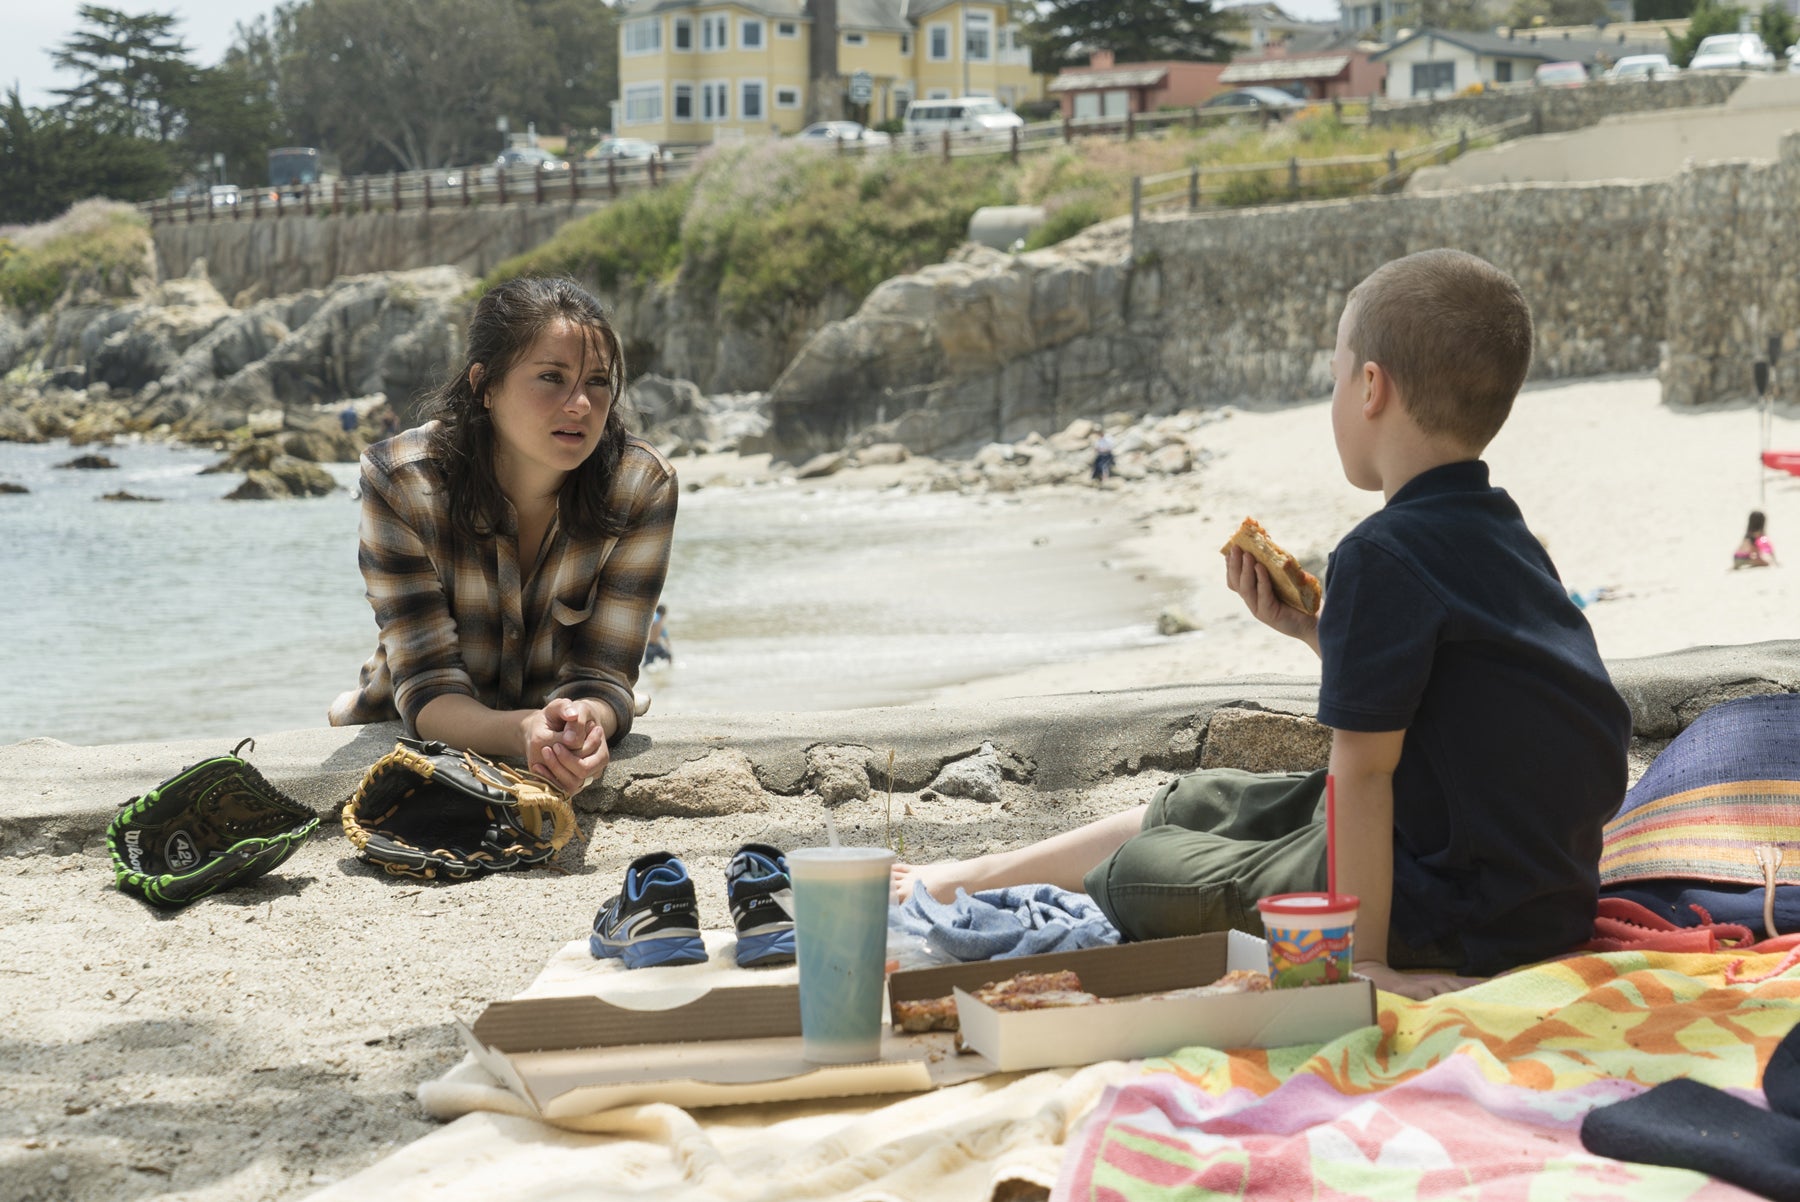 Jane hangs out at the beach with her son, Ziggy (Iain Armitage).